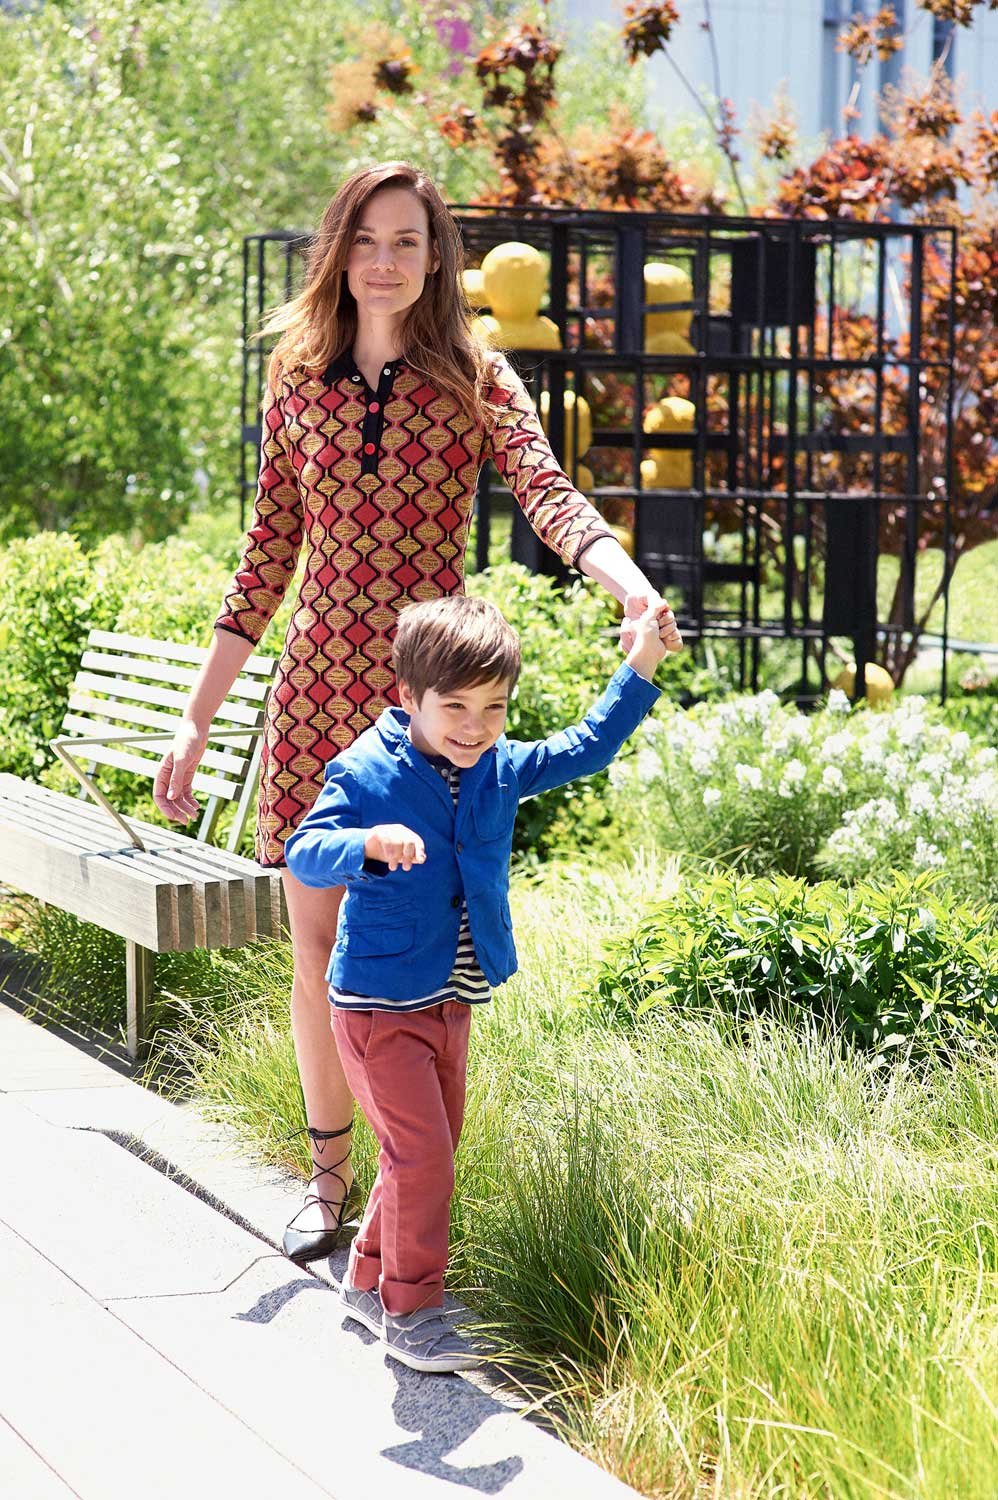  Jenna Gribbon, with Silas, for Vogue 